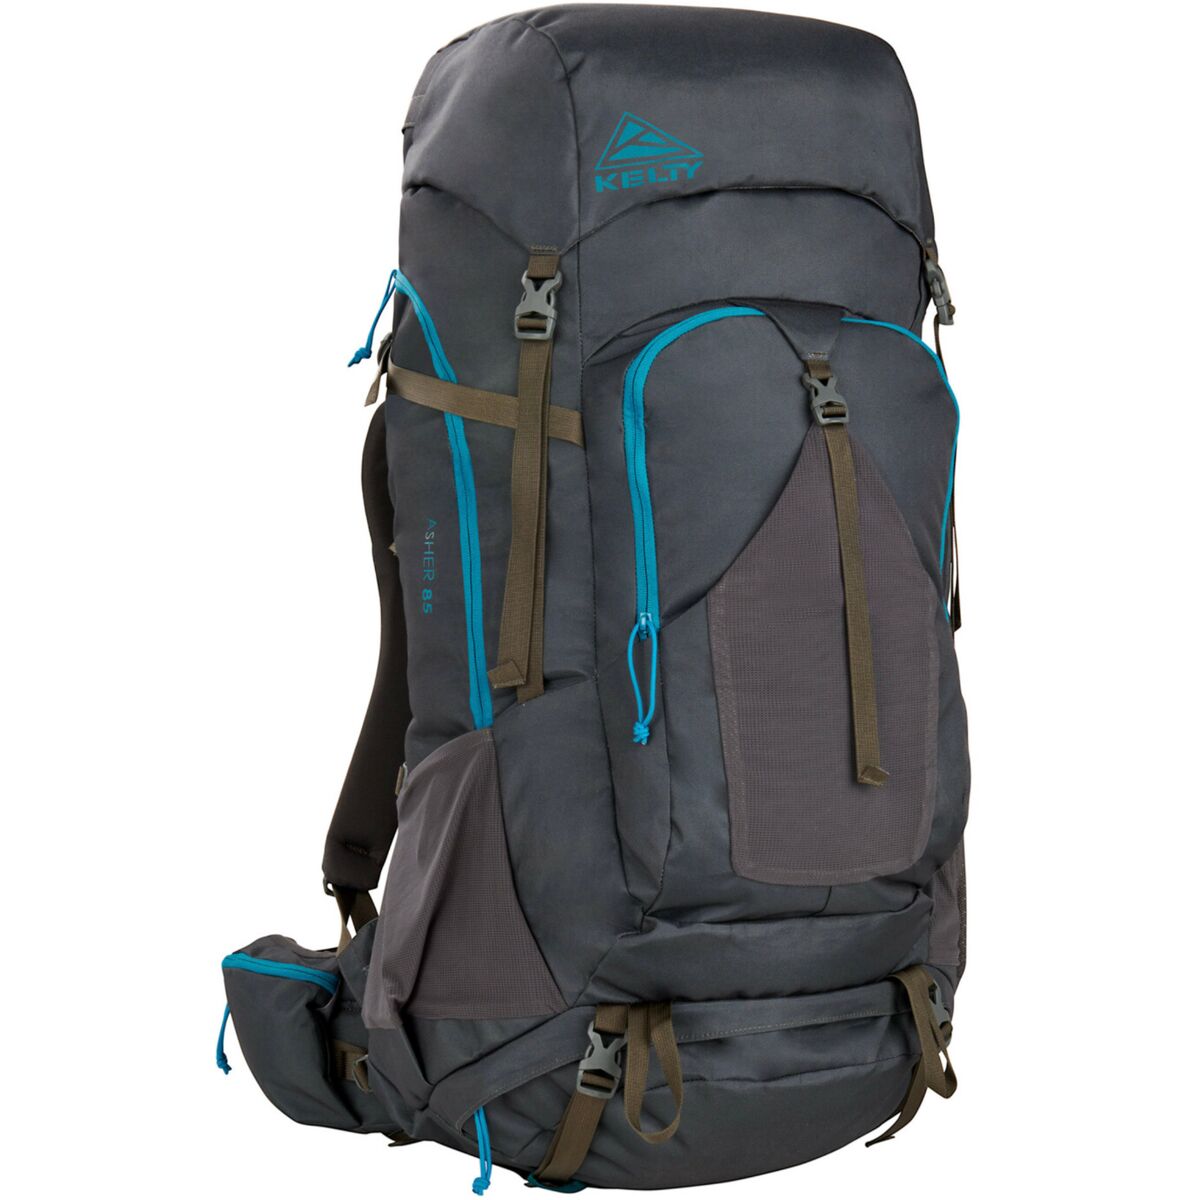 Kelty Asher 85L Backpack